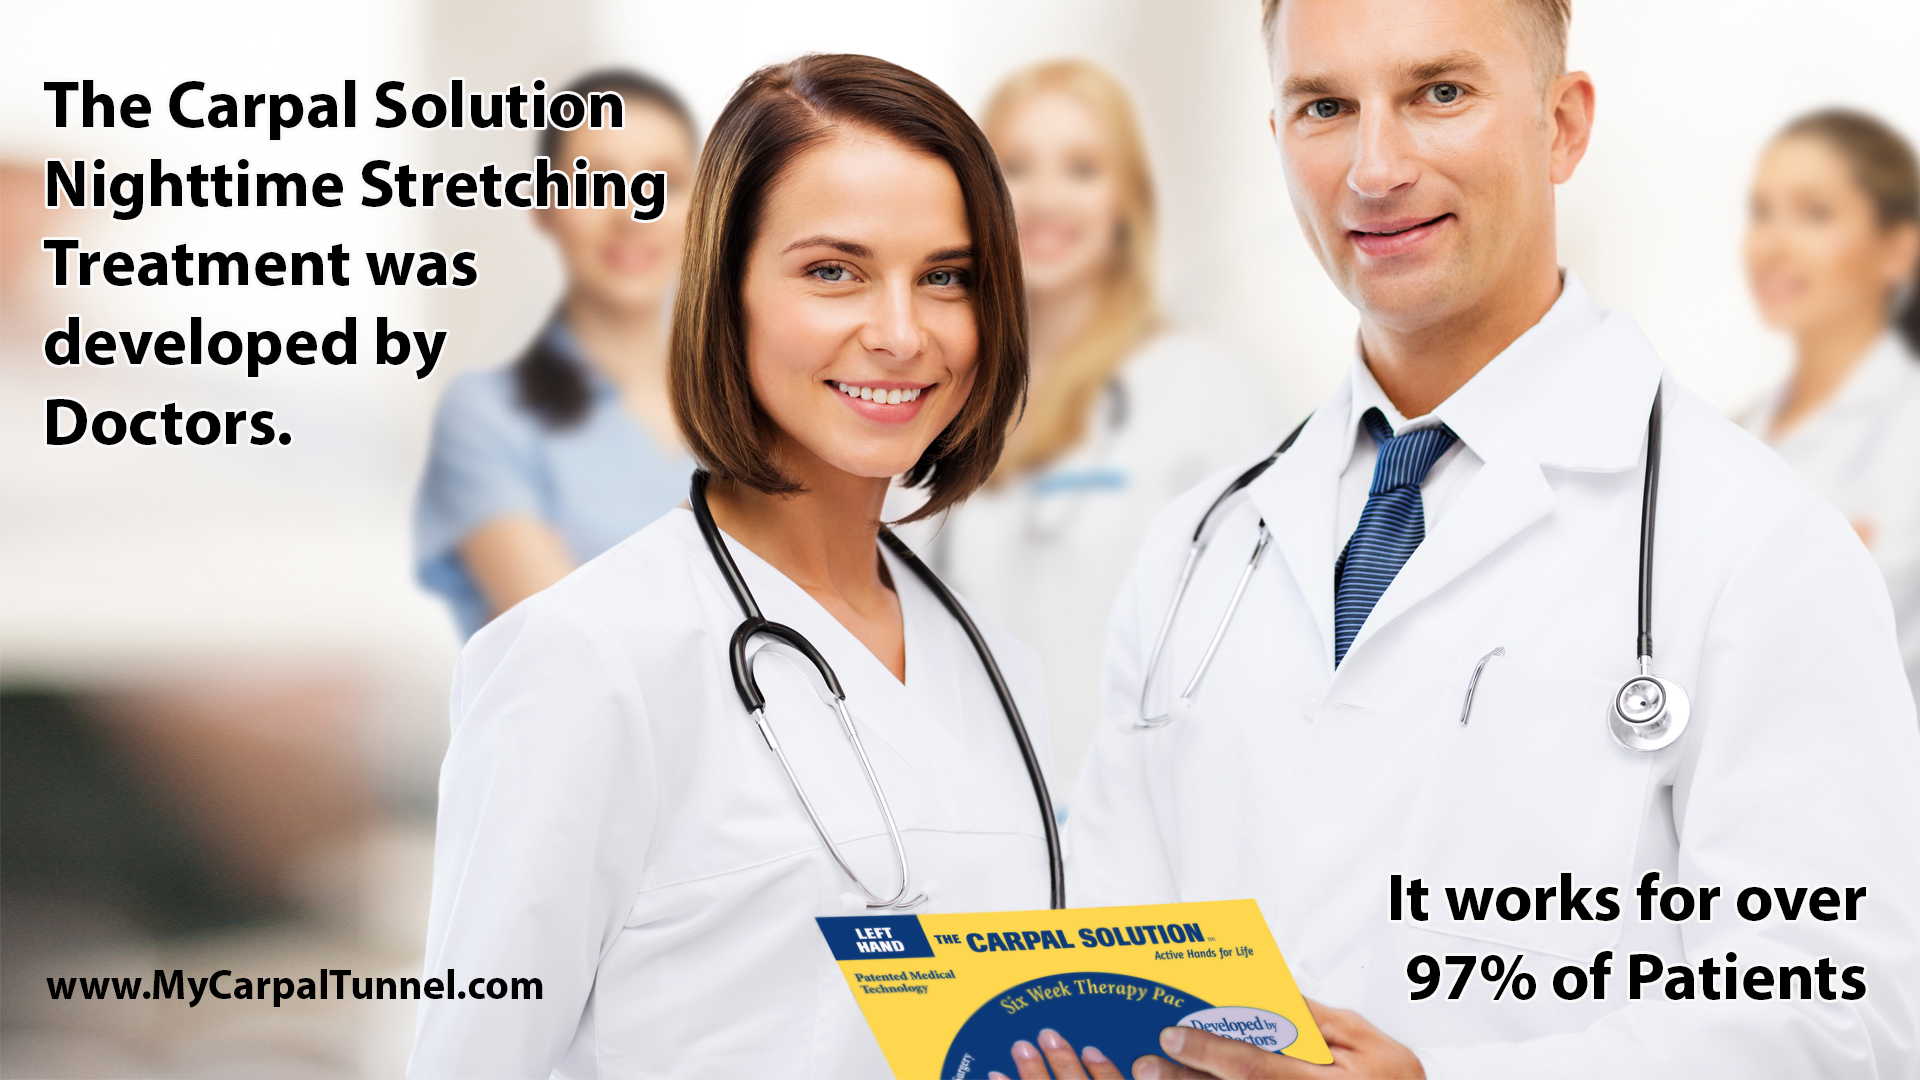 the carpal solution nighttime stretching treatment was developed by doctors